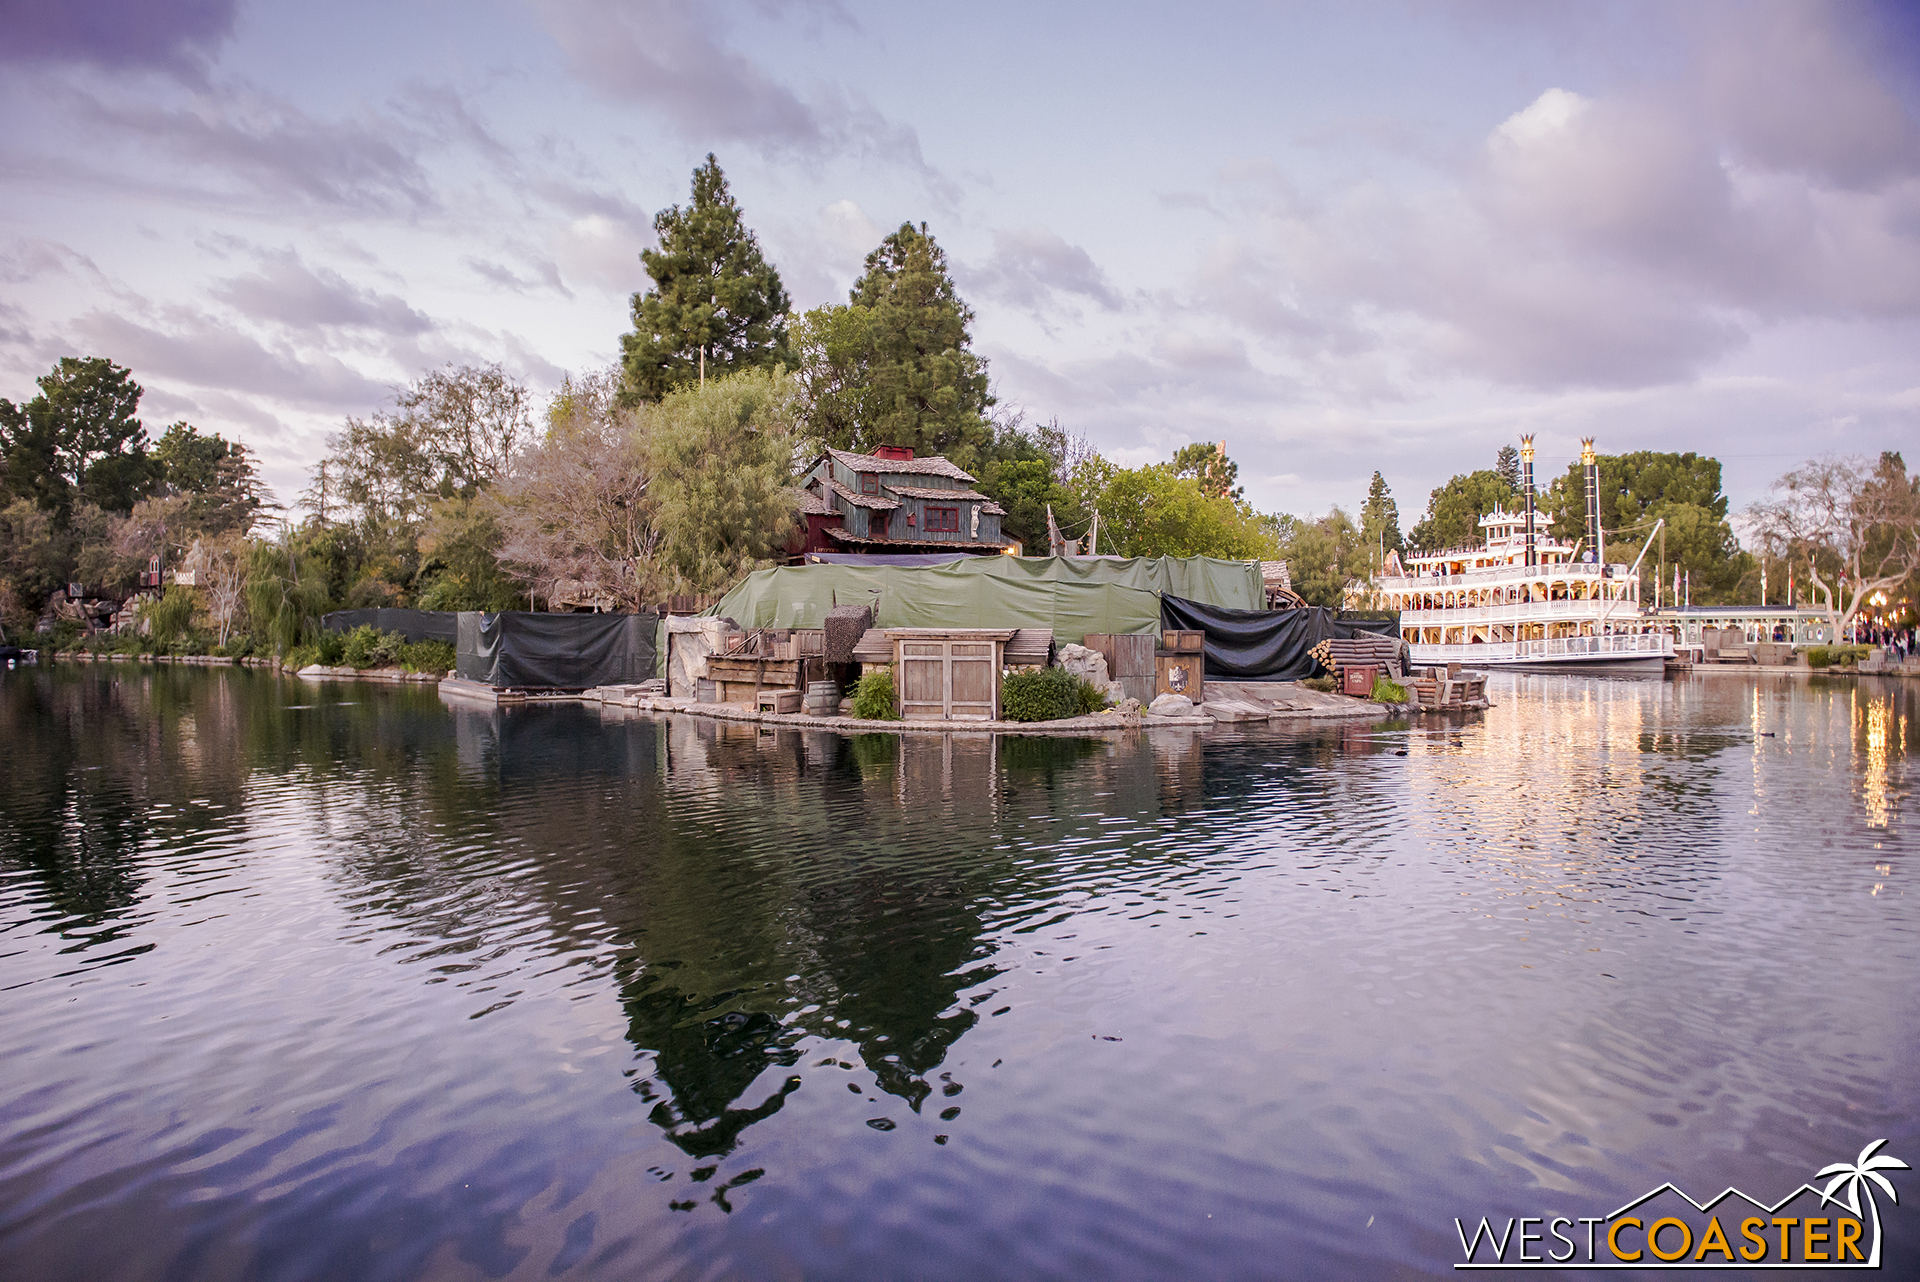  Back to the Island, I have it on very reliable but uncorroborated source that it will feature a reconfigured Maleficent pedestal that will now be Elsa casting incredible snow effects and whirling ice creations in the new FANTASMIC! 